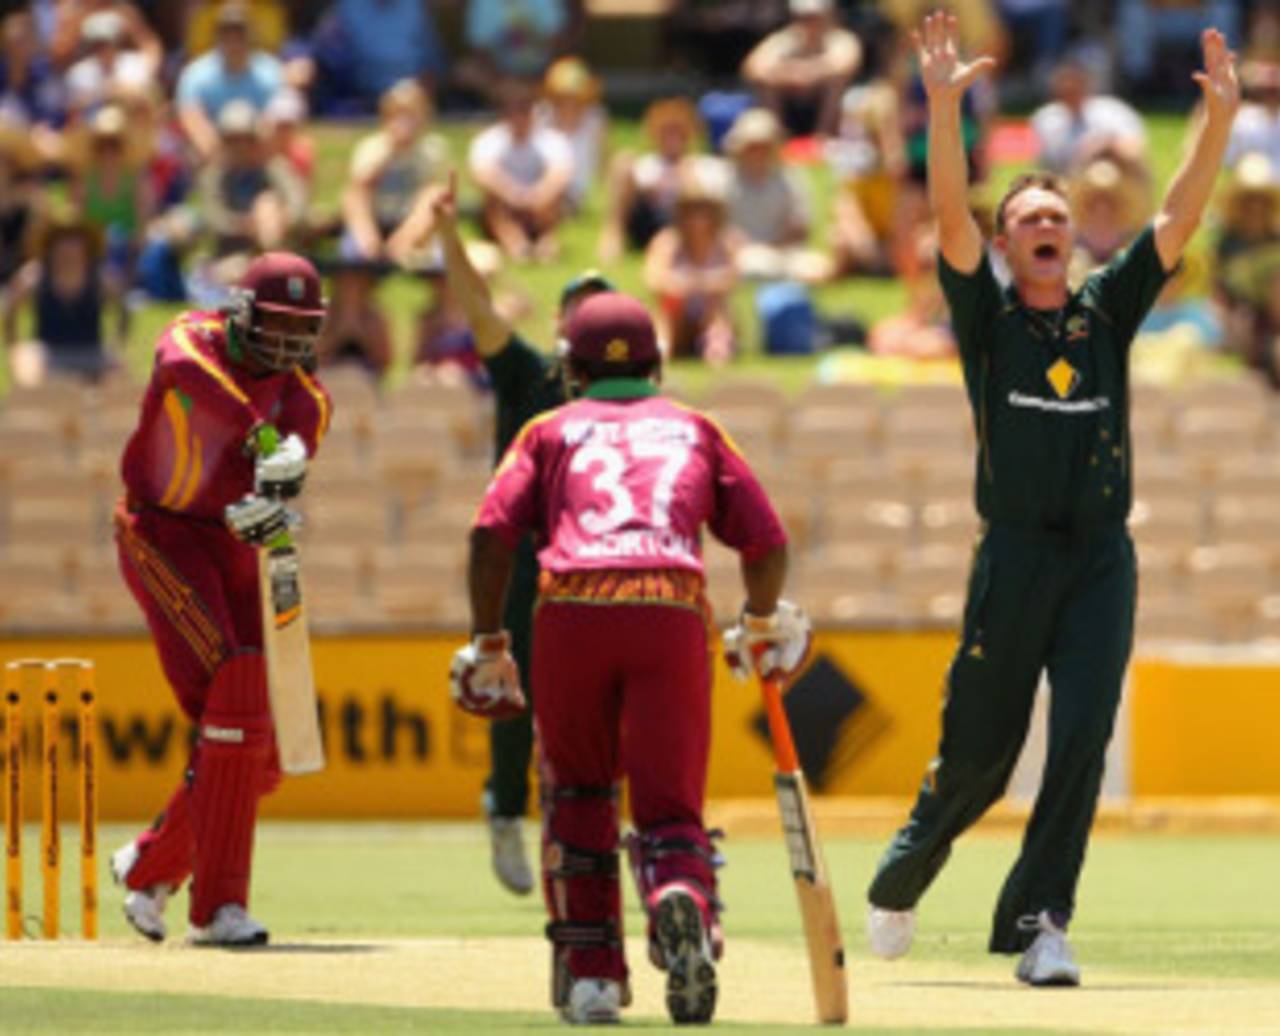 Doug Bollinger appeals successfully for Chris Gayle's wicket, Australia v West Indies, 2nd ODI, Adelaide, 9 February, 2010